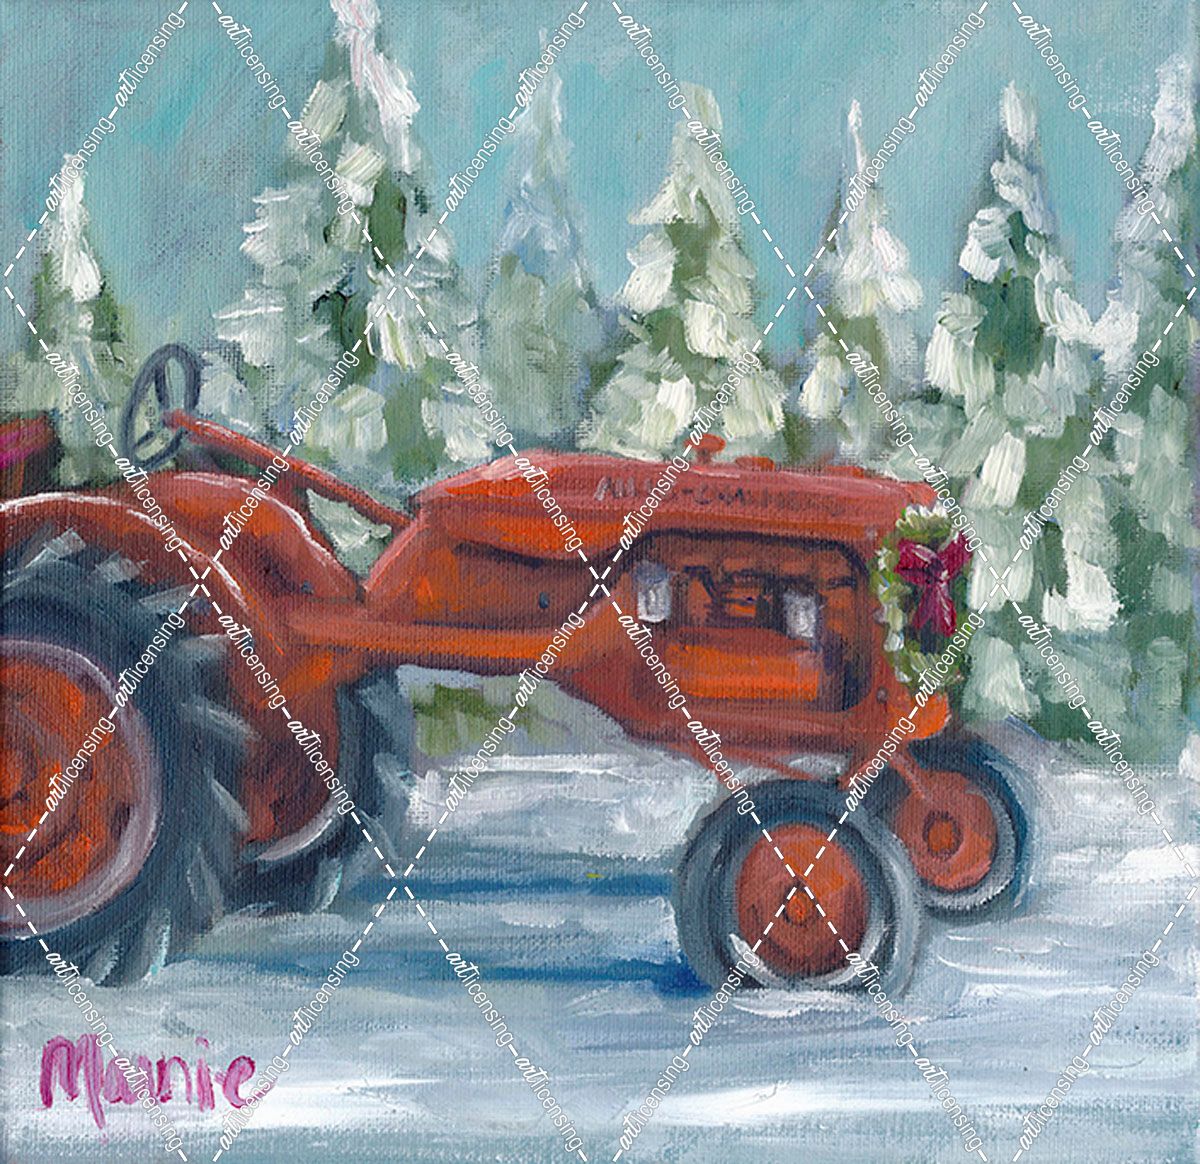 Tractor-4 Seasons-Allis Chalmers Holiday